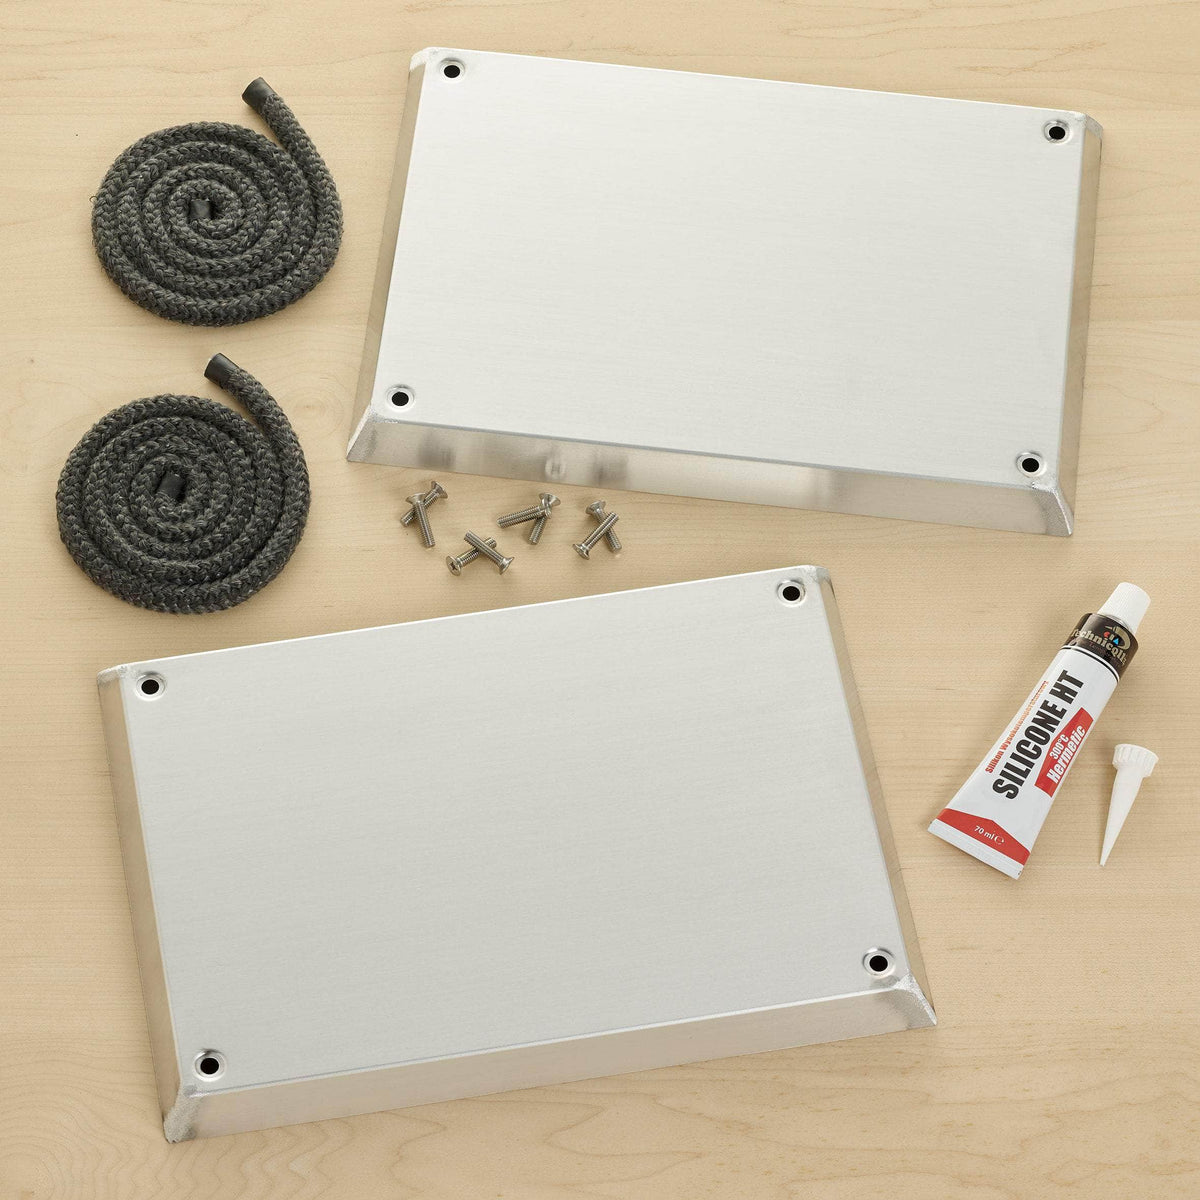 *New* Module Door liner replacement kit for use with Aga range cooker companion modules